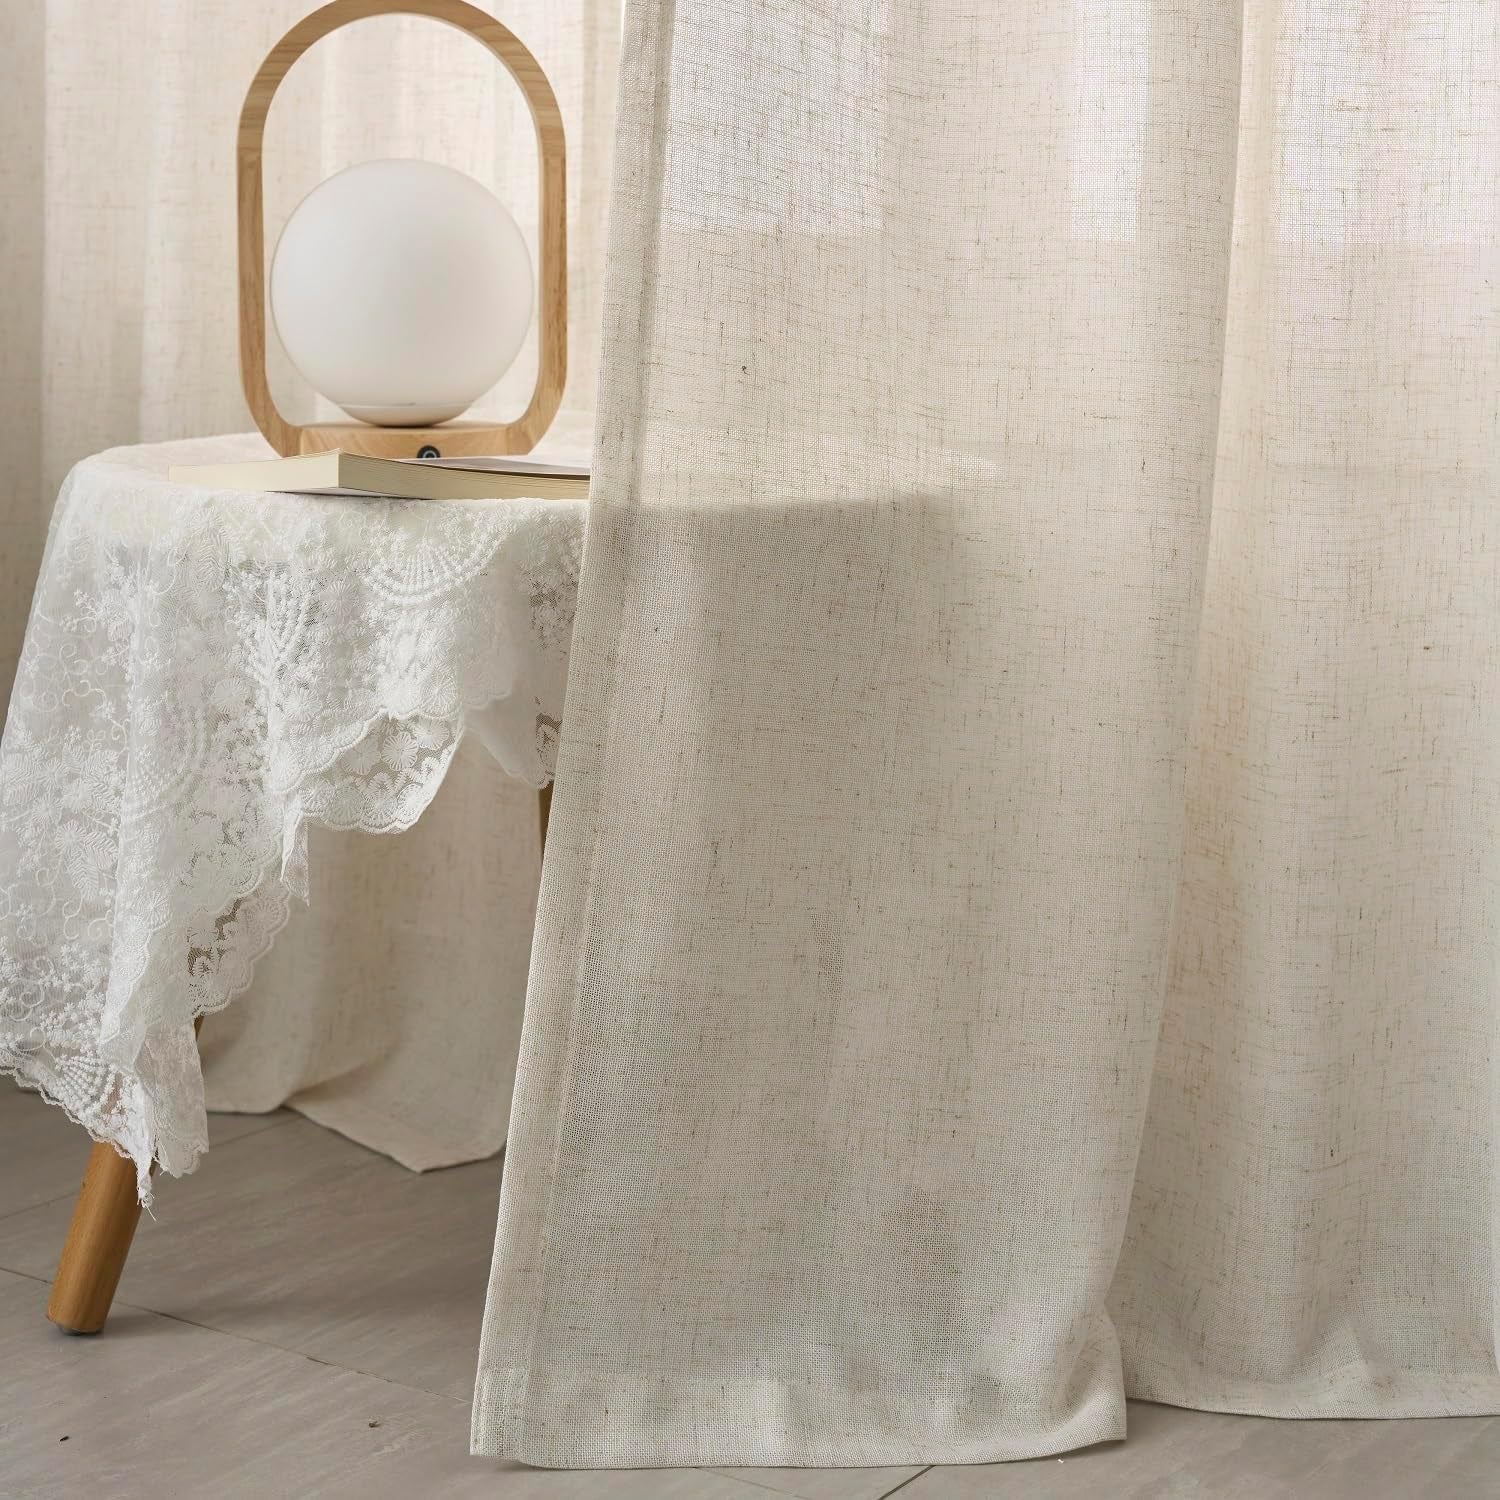 Pinch Pleated Curtains Sheer Curtains 96 Inches Long Faux Linen Curtains 96 Inch Curtains with Hooks for Track Neutral Curtains for Living Room Long Curtains Drapes Cream Beige 2 Panels Set  Ftinala   